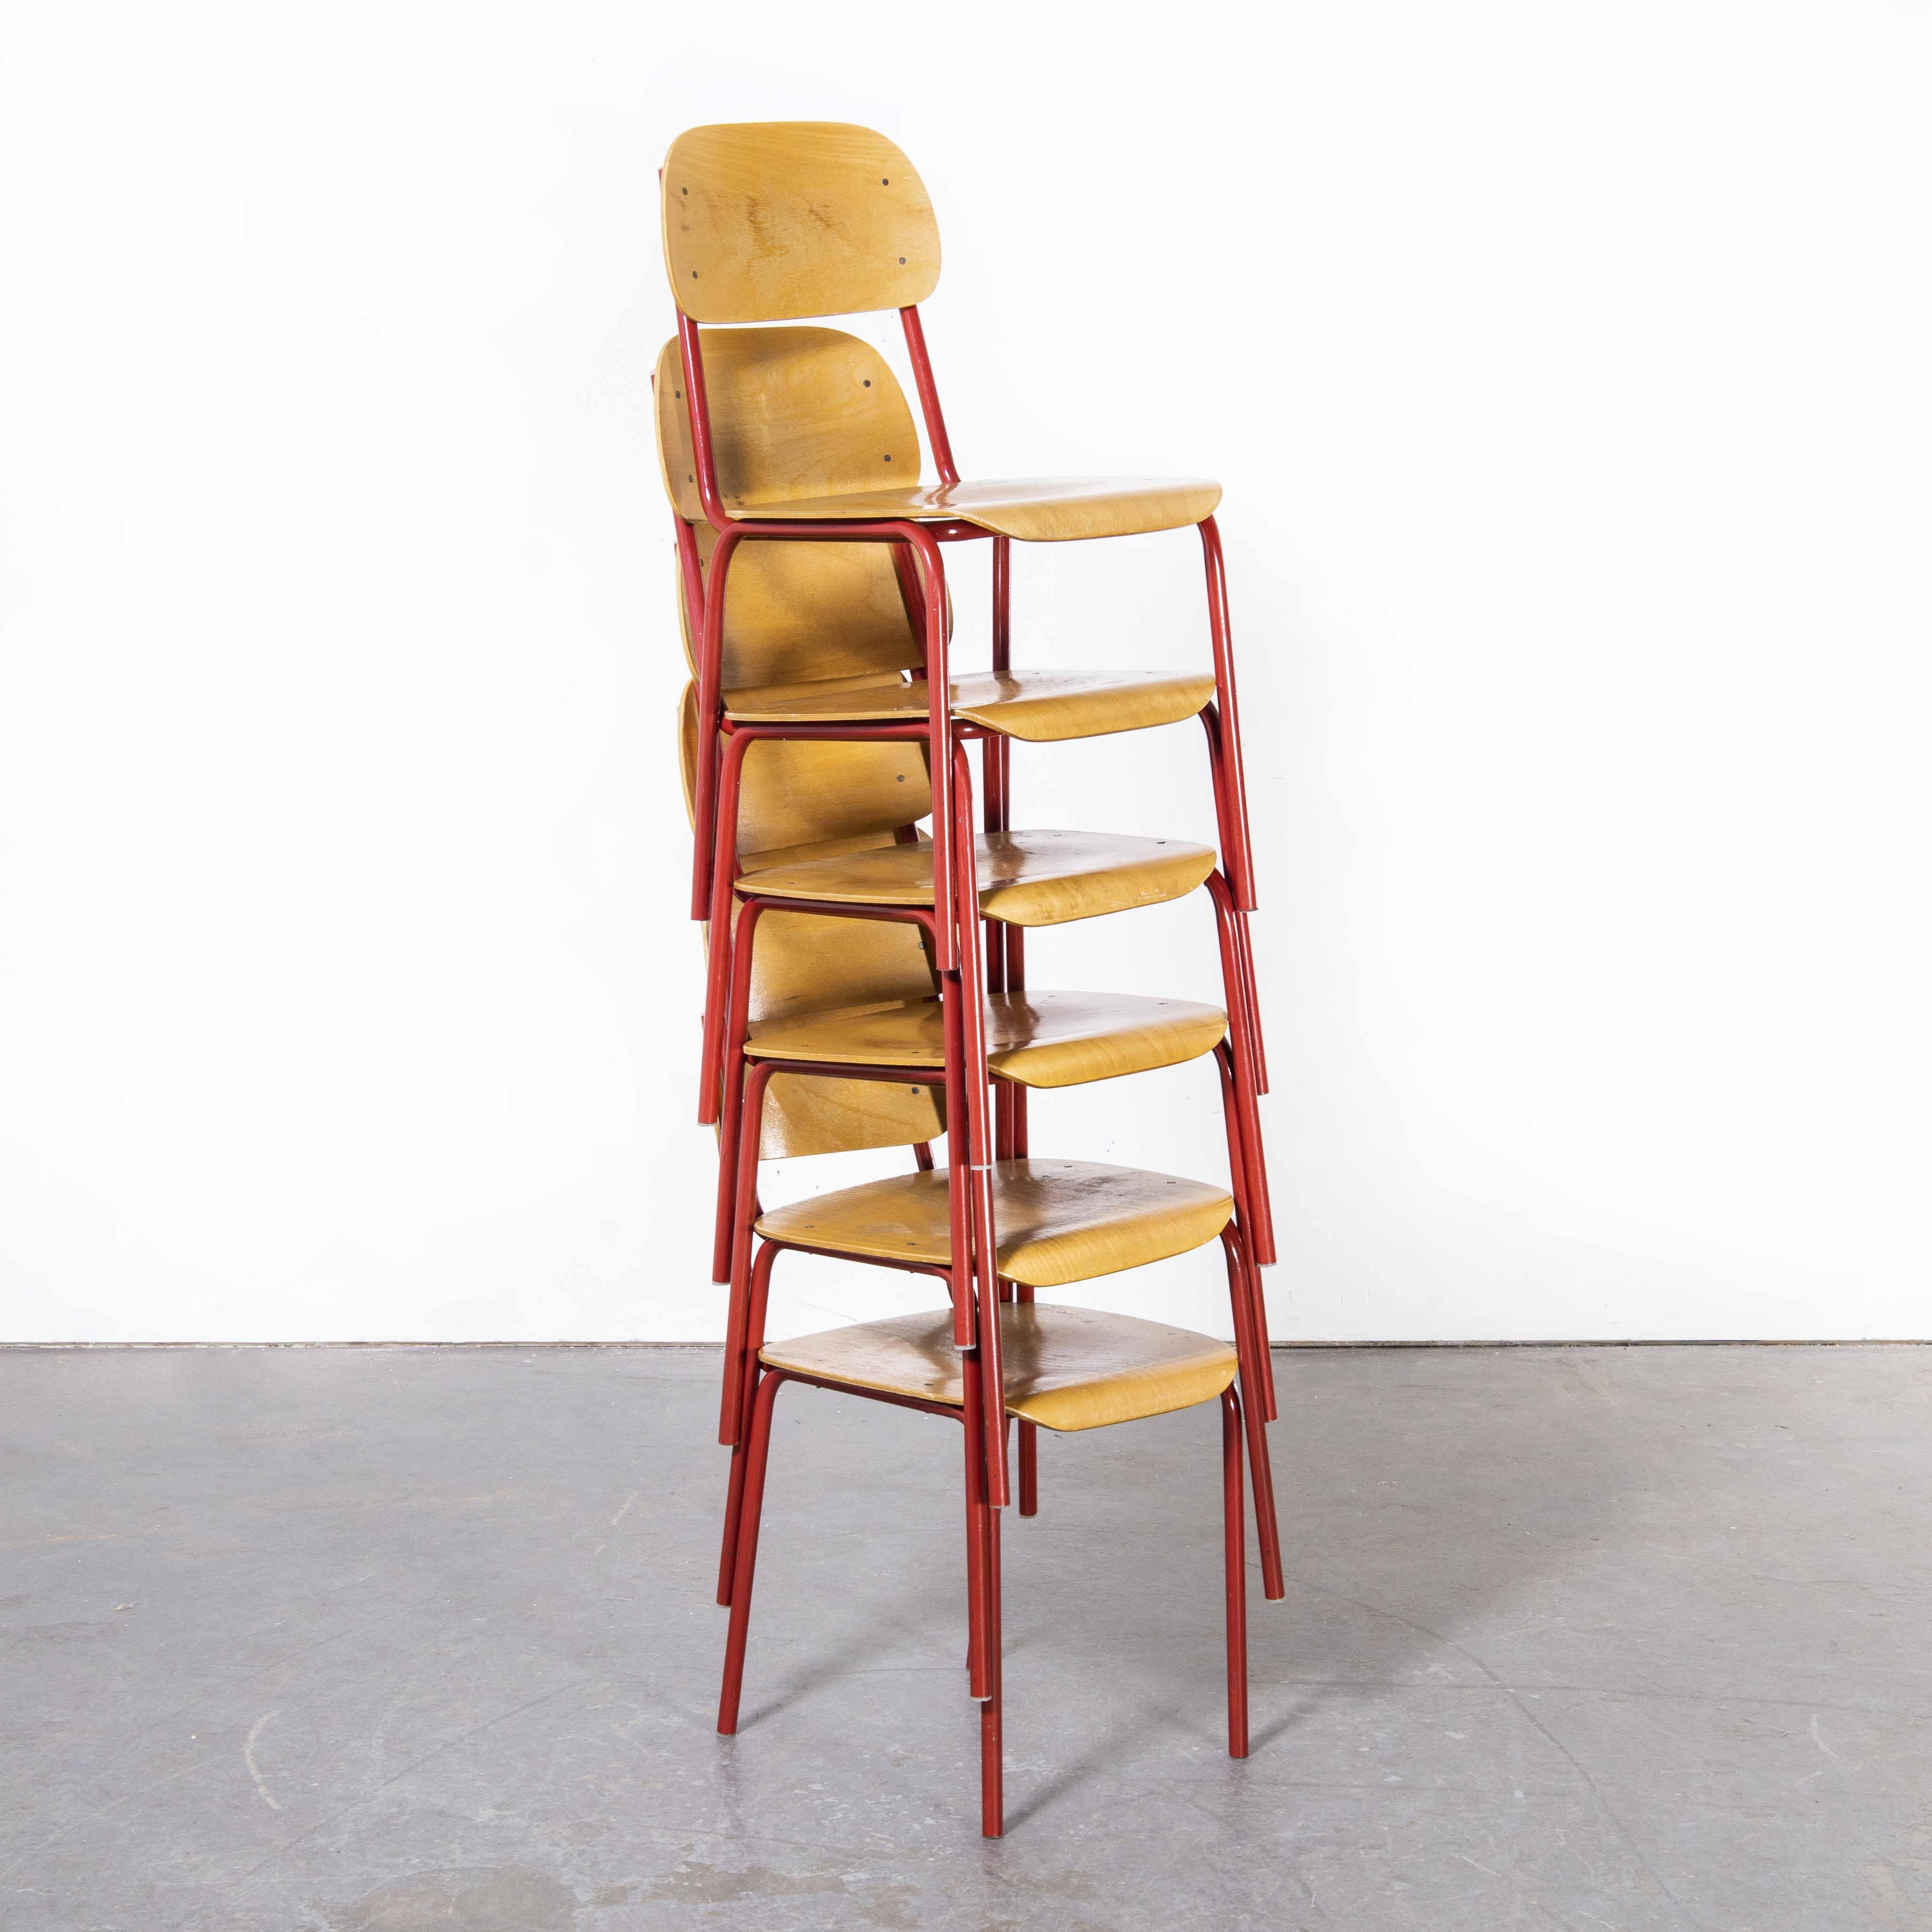 1970's Czech Industrial Stacking Chairs, Red, Set of Six For Sale 6